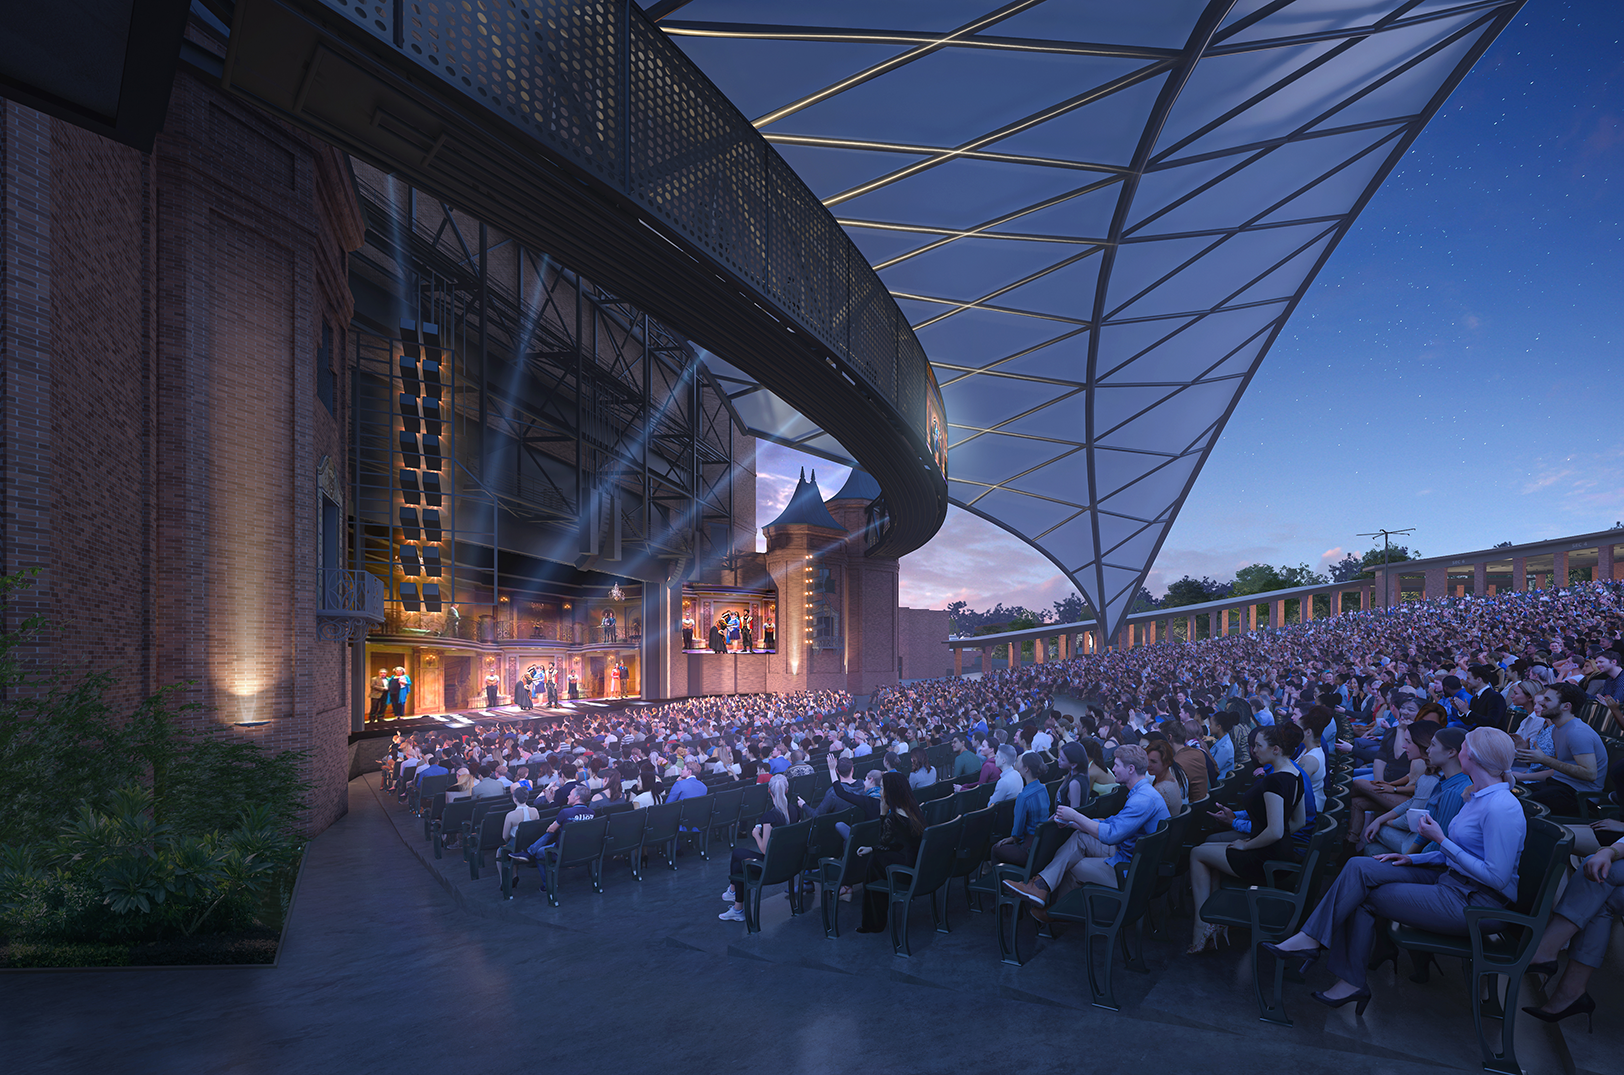 Starlight wants to add a canopy to KC’s famed outdoor theater; Here’s what else its $40M capital campaign would bring